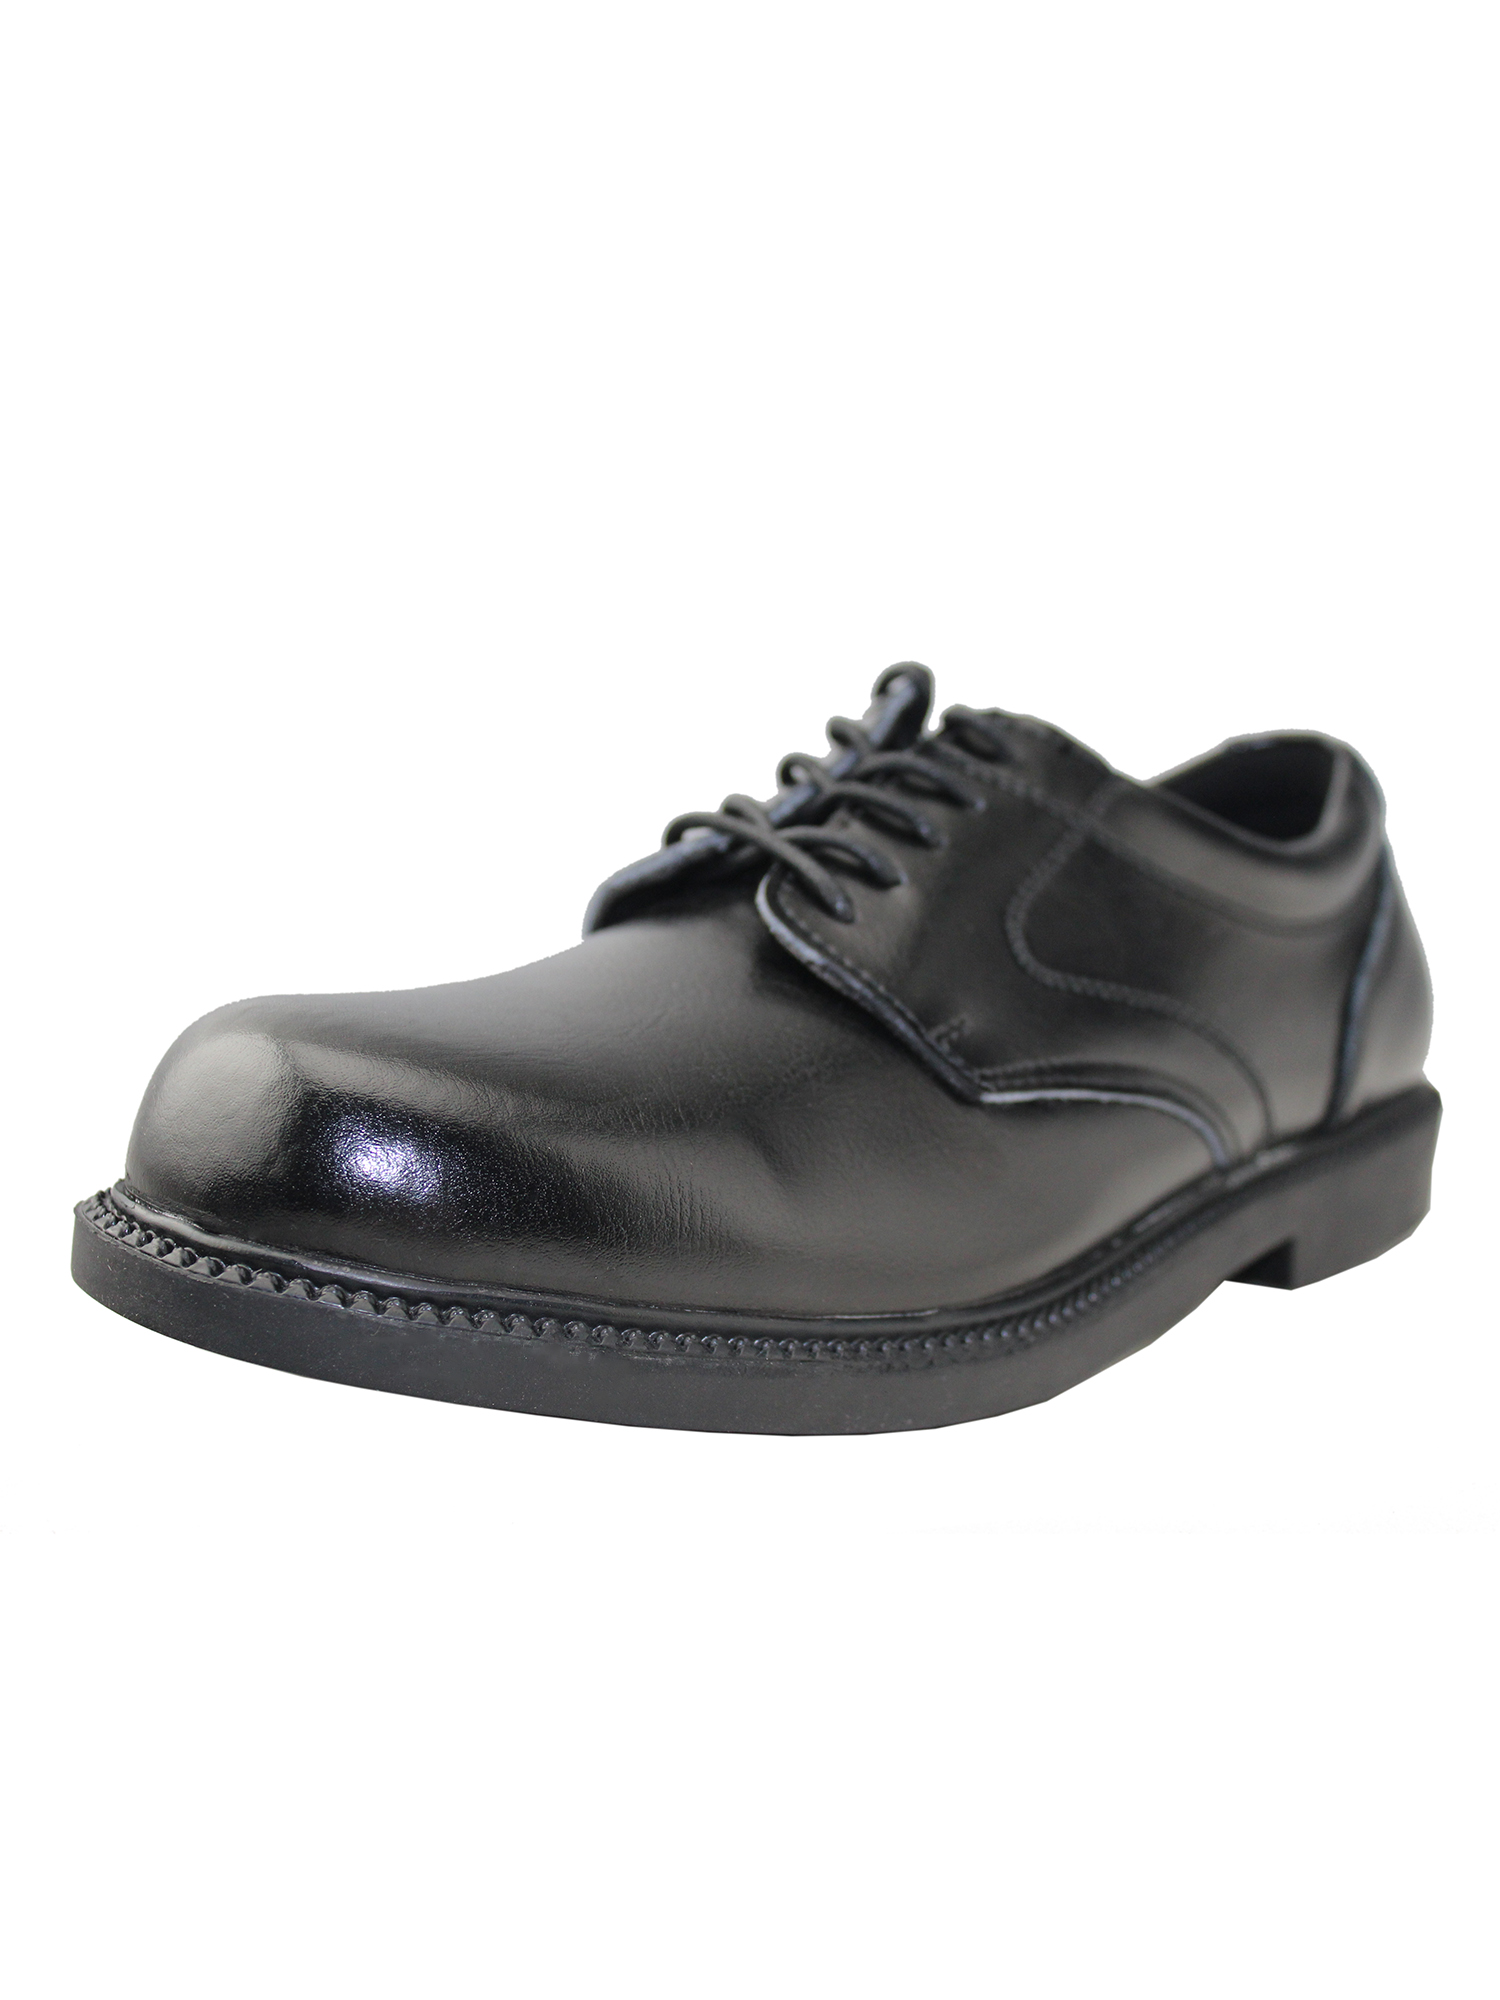 Mens Oxford Leather Shoes Comfortable Black Lace Up Slip and Oil Resistant Shoes - image 1 of 5